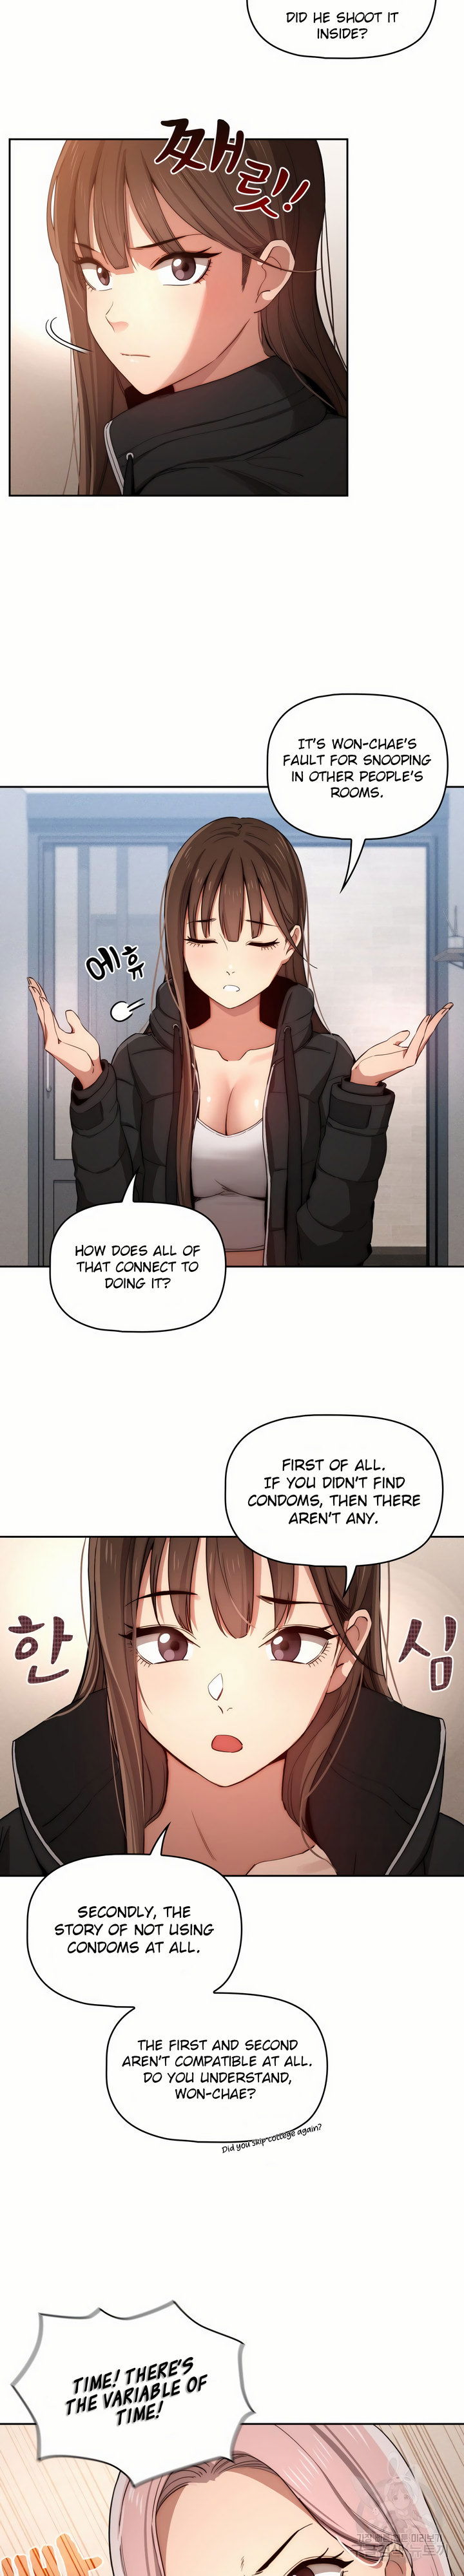 private-tutoring-in-these-trying-times-chap-34-1